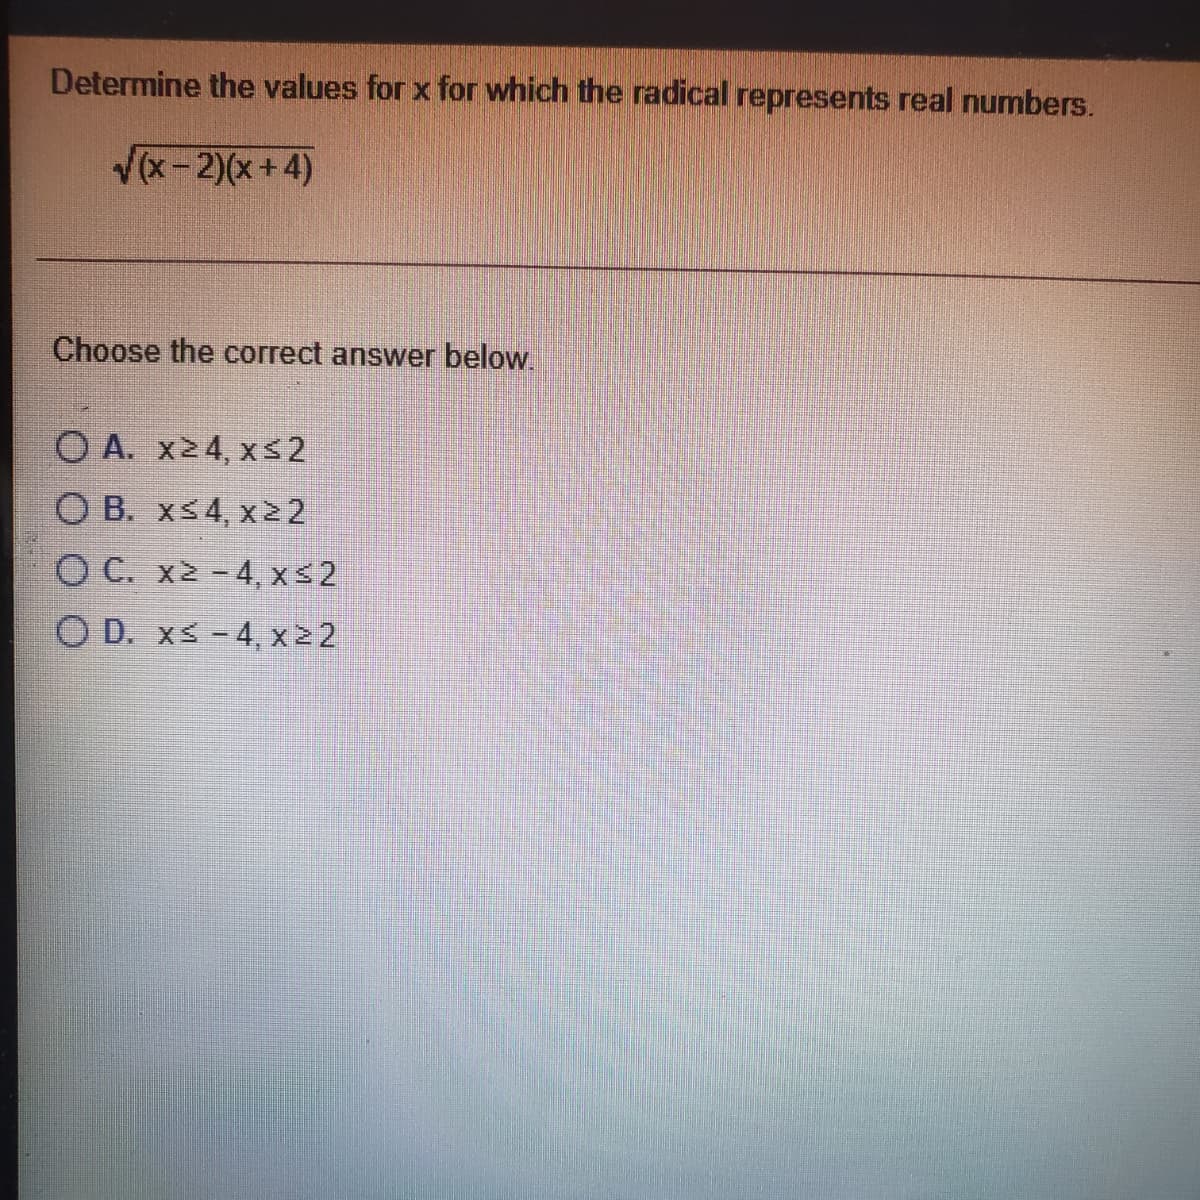 Determine the values for x for which the radical represents real numbers.
V(x- 2)(x +4)
Choose the correct answer below.
O A. x24, xs2
O B. xs4, x22
O C. x2 -4, xs2
O D. xs -4, xz2
